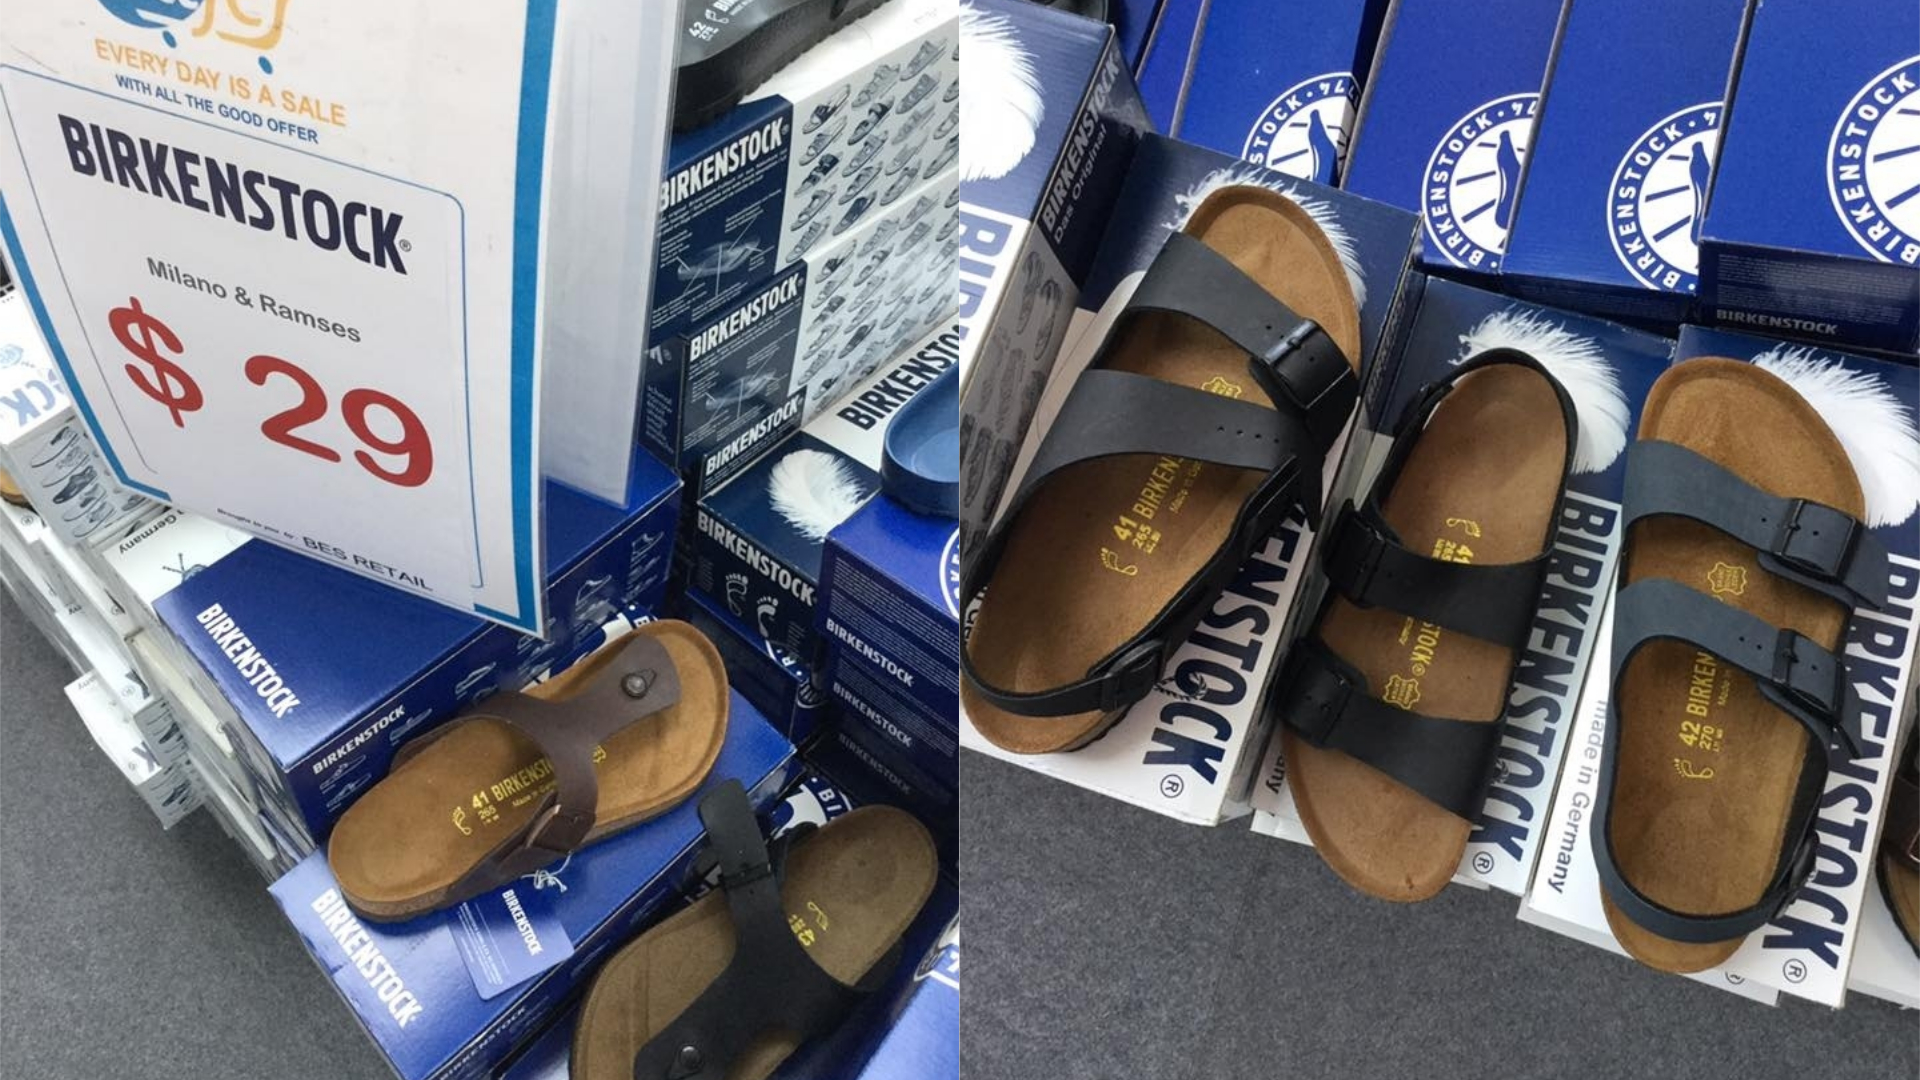 Birkenstock sandals available from S$29 